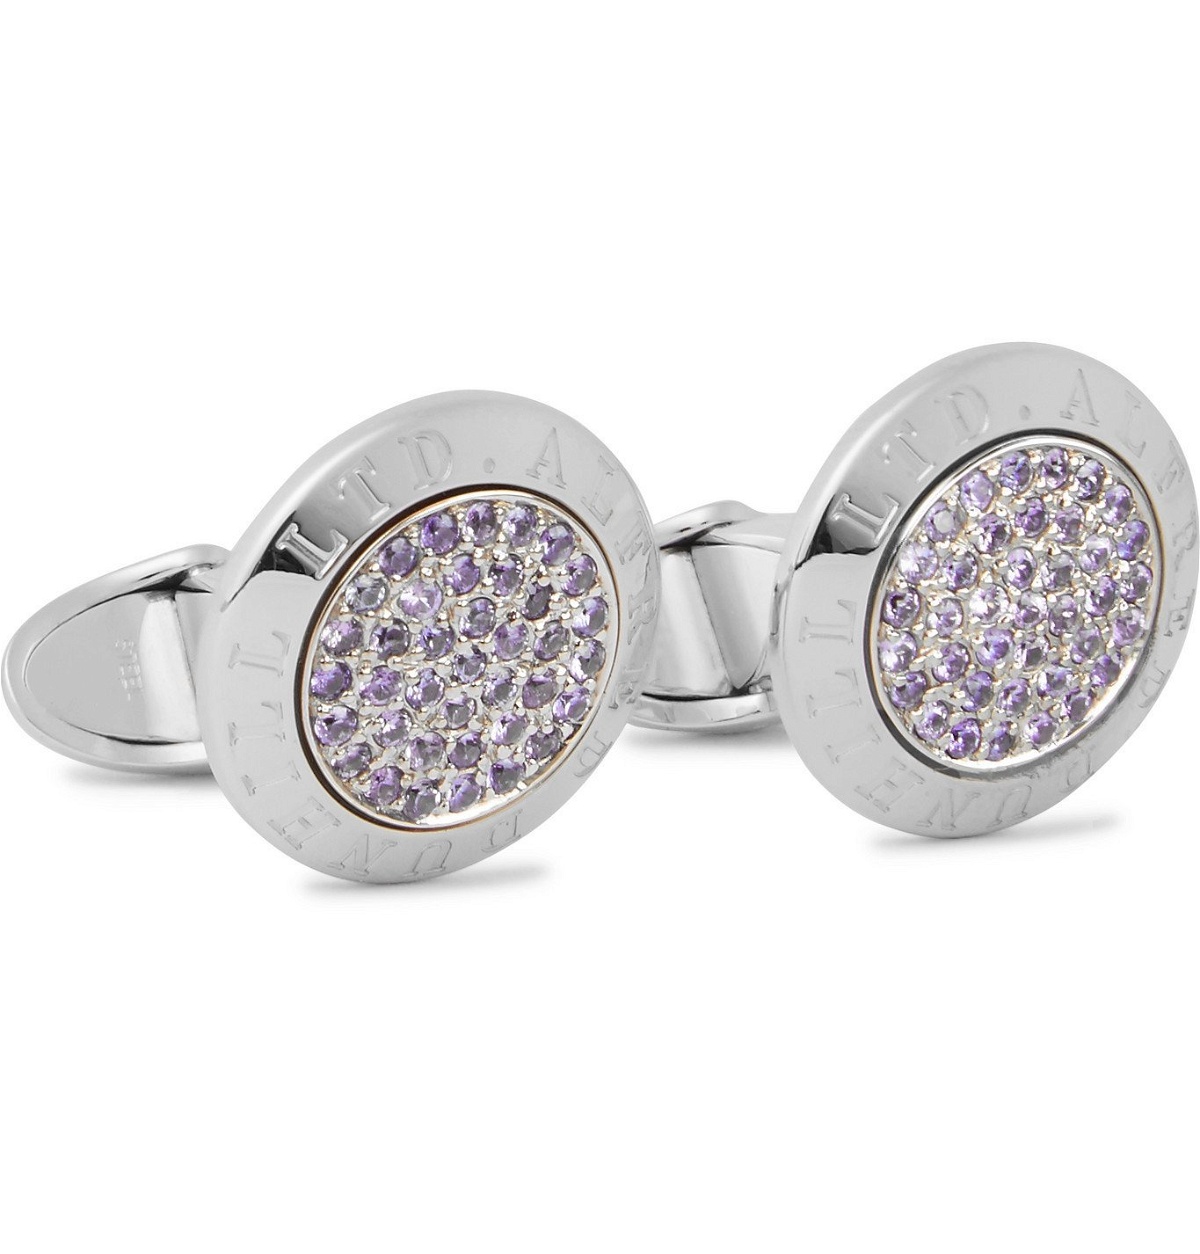 Photo: DUNHILL - Alfred Dunhill White Gold and Sapphire Cufflinks - White gold